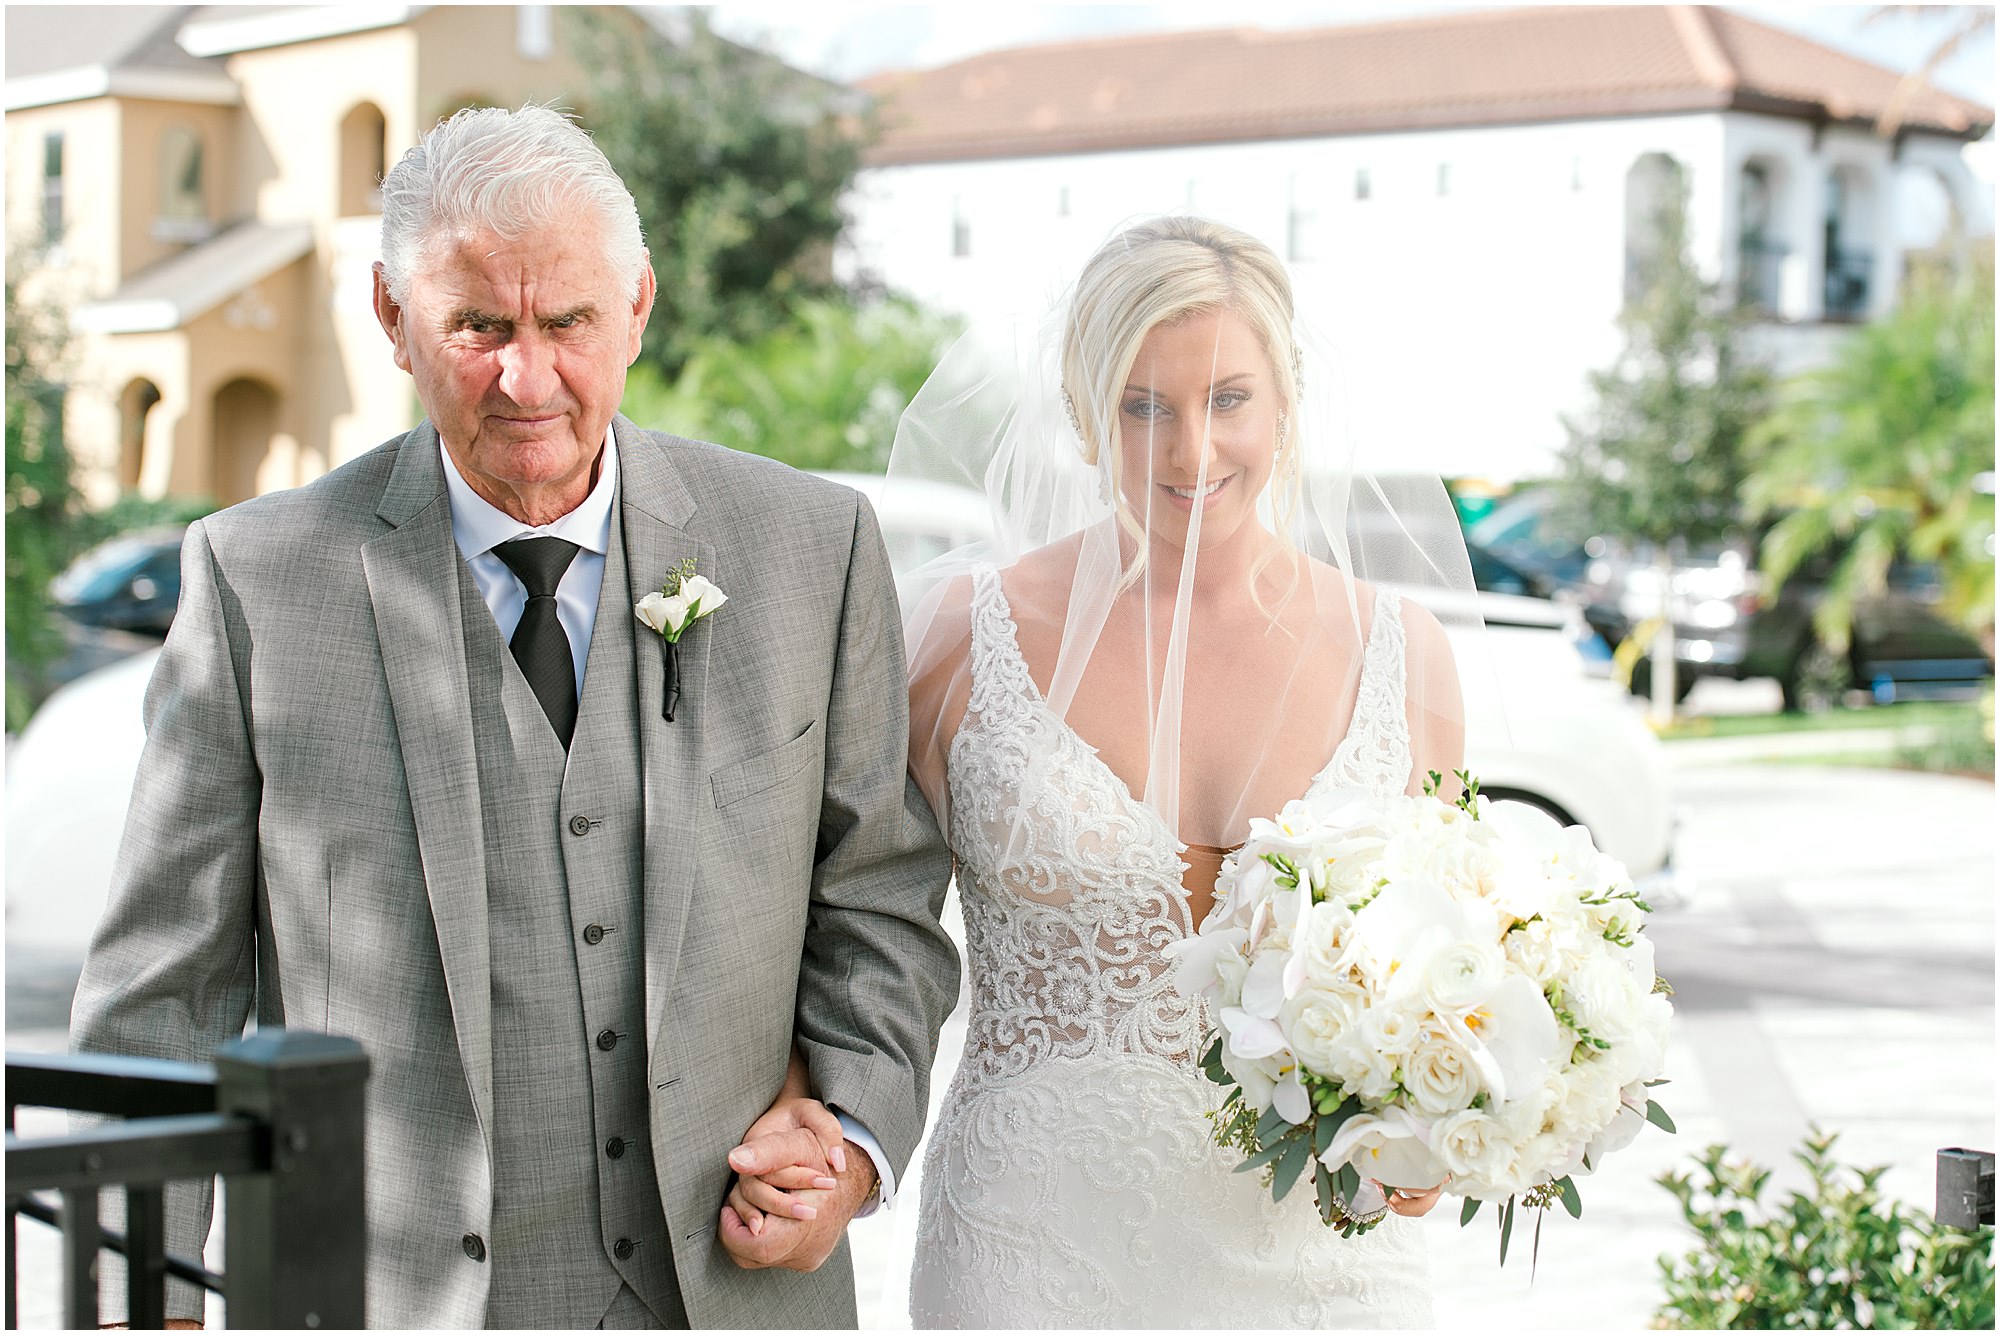 Bride being escorted by her grandfather